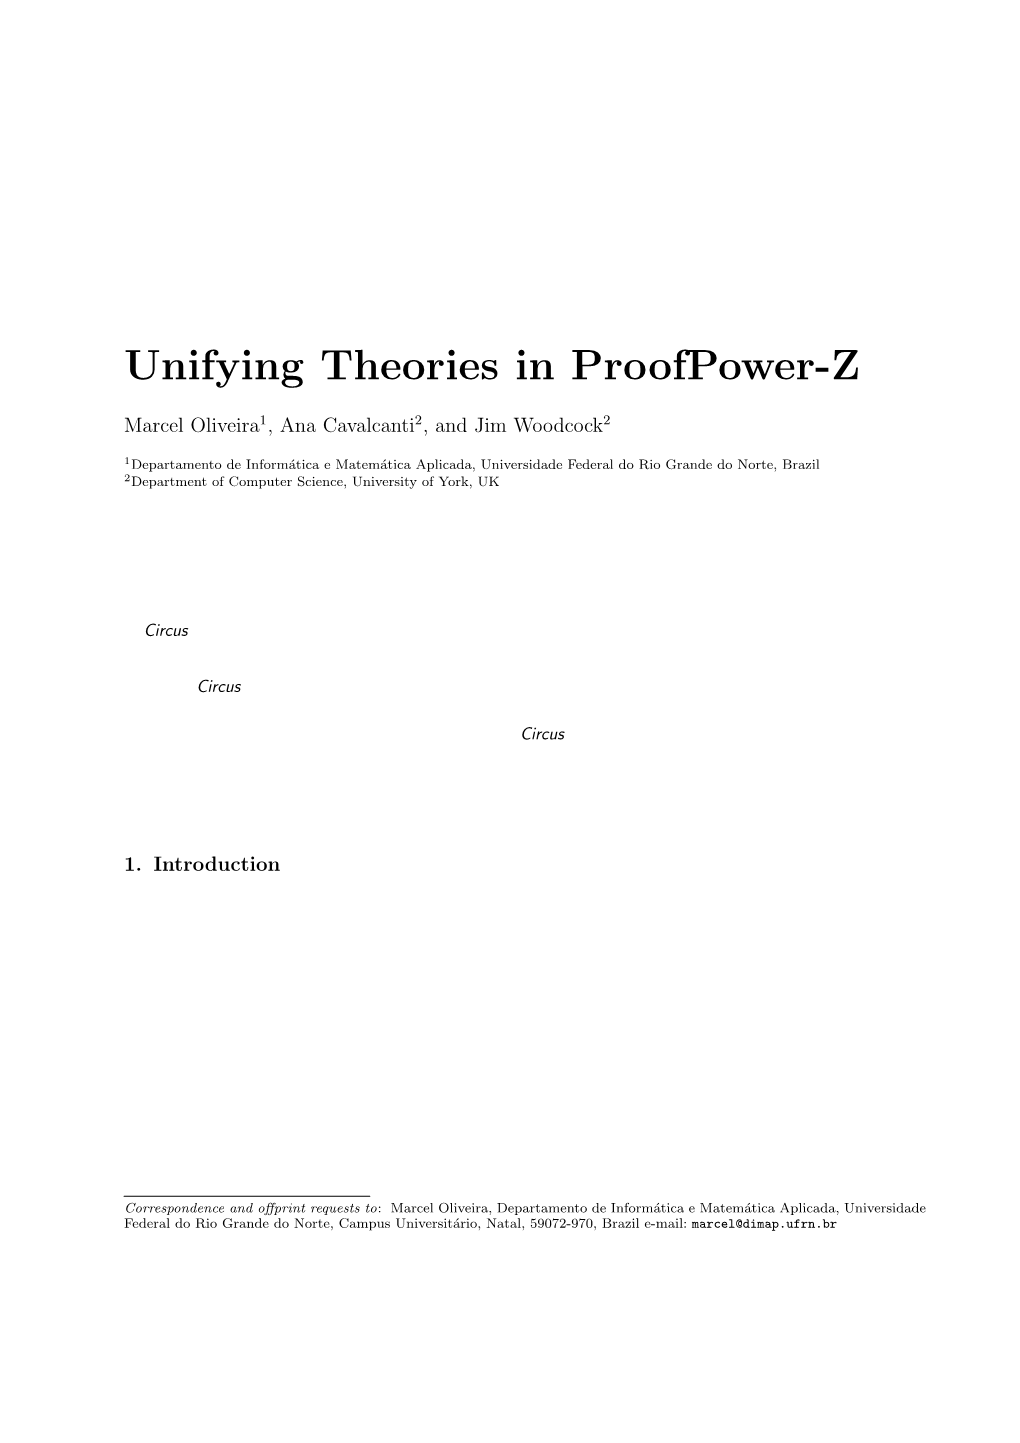 Unifying Theories in Proofpower-Z